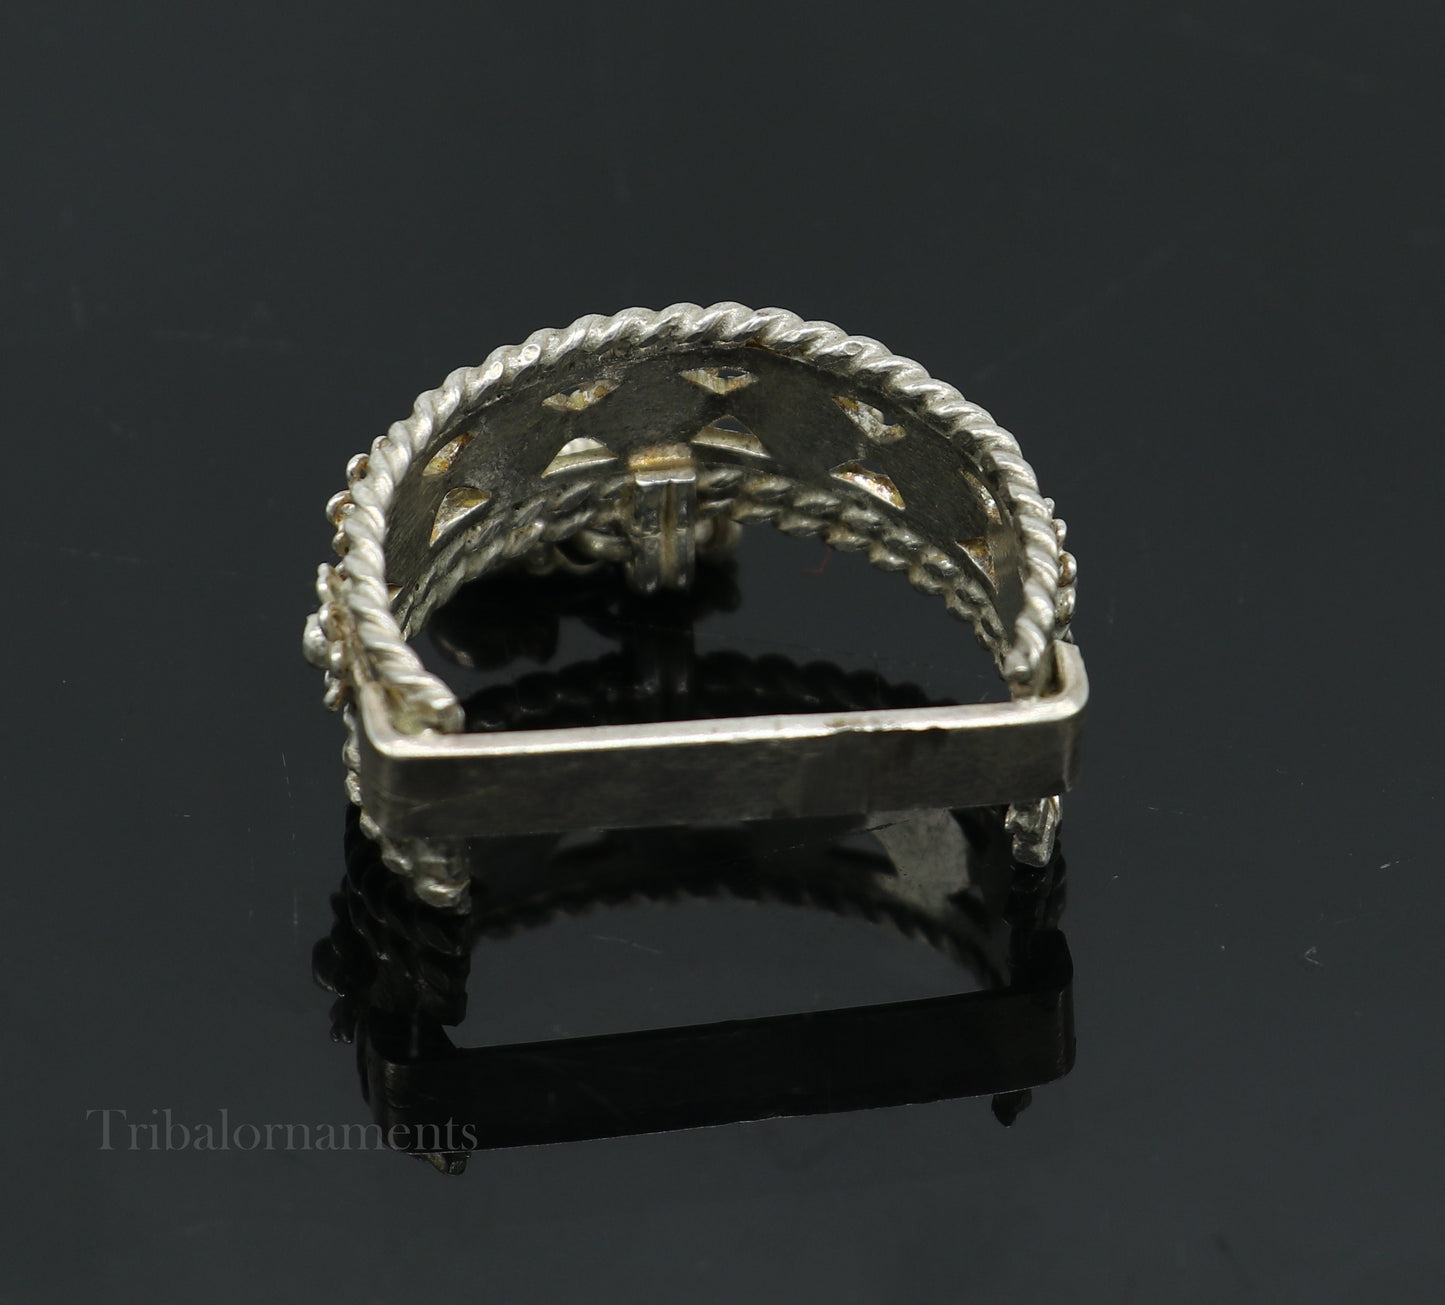 Solid sterling silver handmade Vintage antique design excellent thumb toe ring, thumb ring for foot belly dance tribal jewelry tr54 - TRIBAL ORNAMENTS